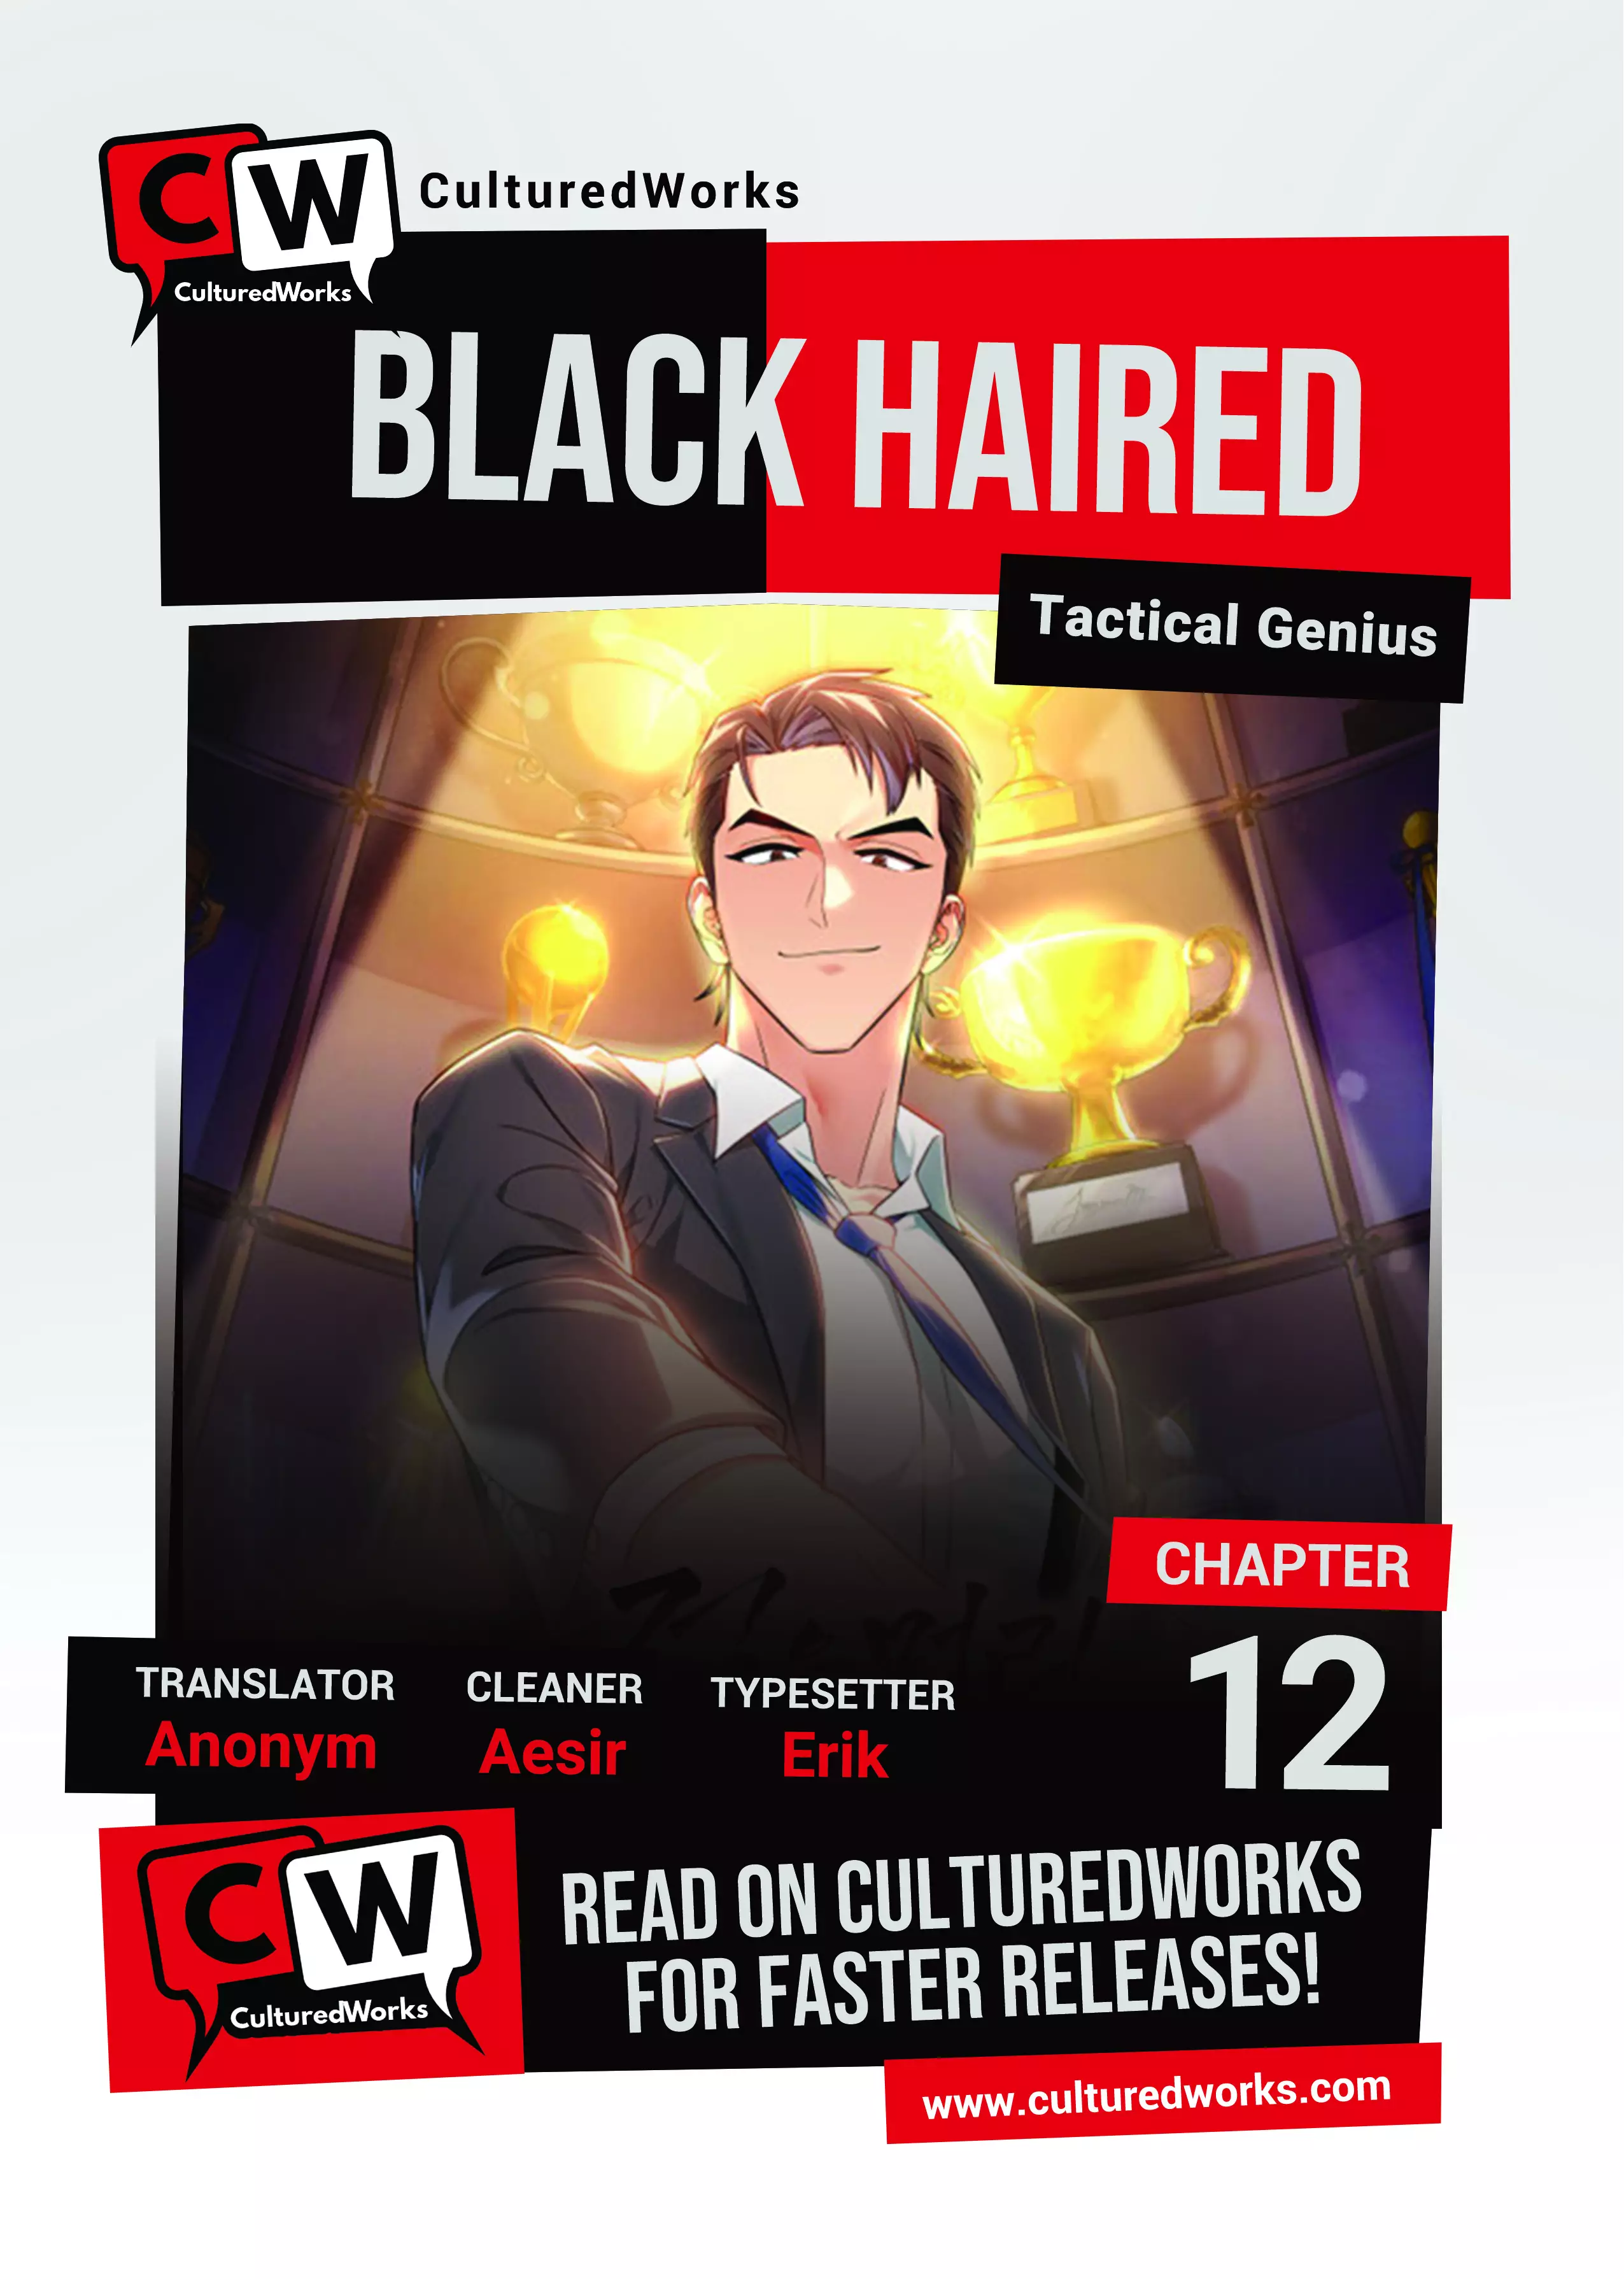 Black-Haired Tactical Genius - 12 page 1-66939488